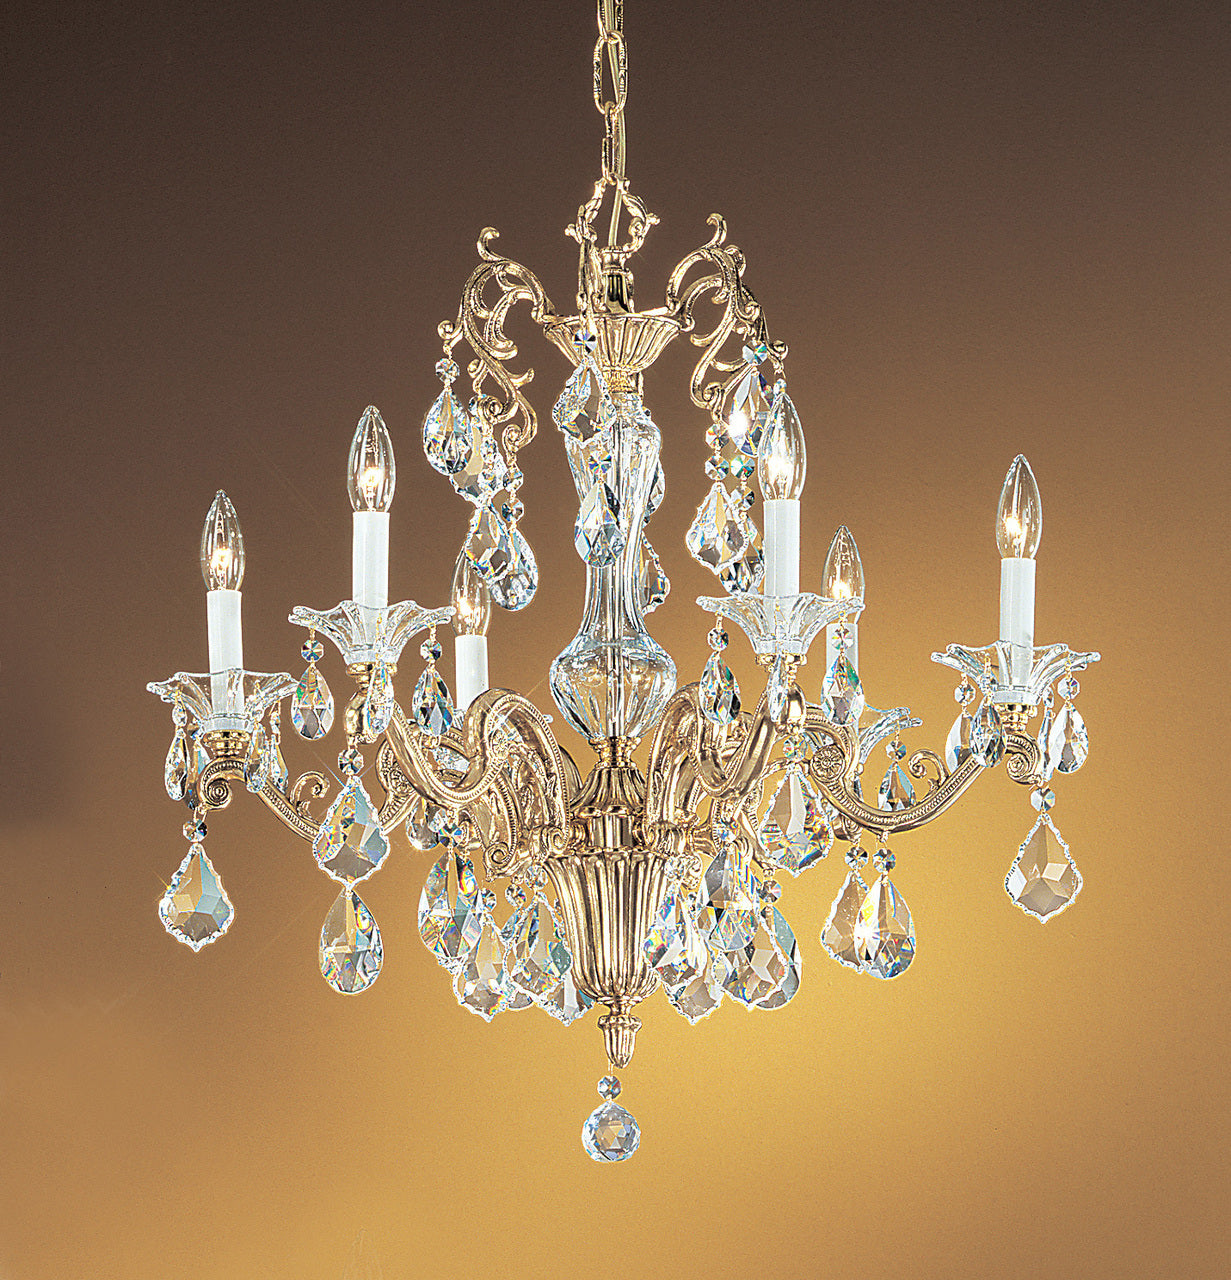 Classic Lighting 57106 BBK IRA Via Firenze Crystal Chandelier in Bronze/Black Patina (Imported from Spain)